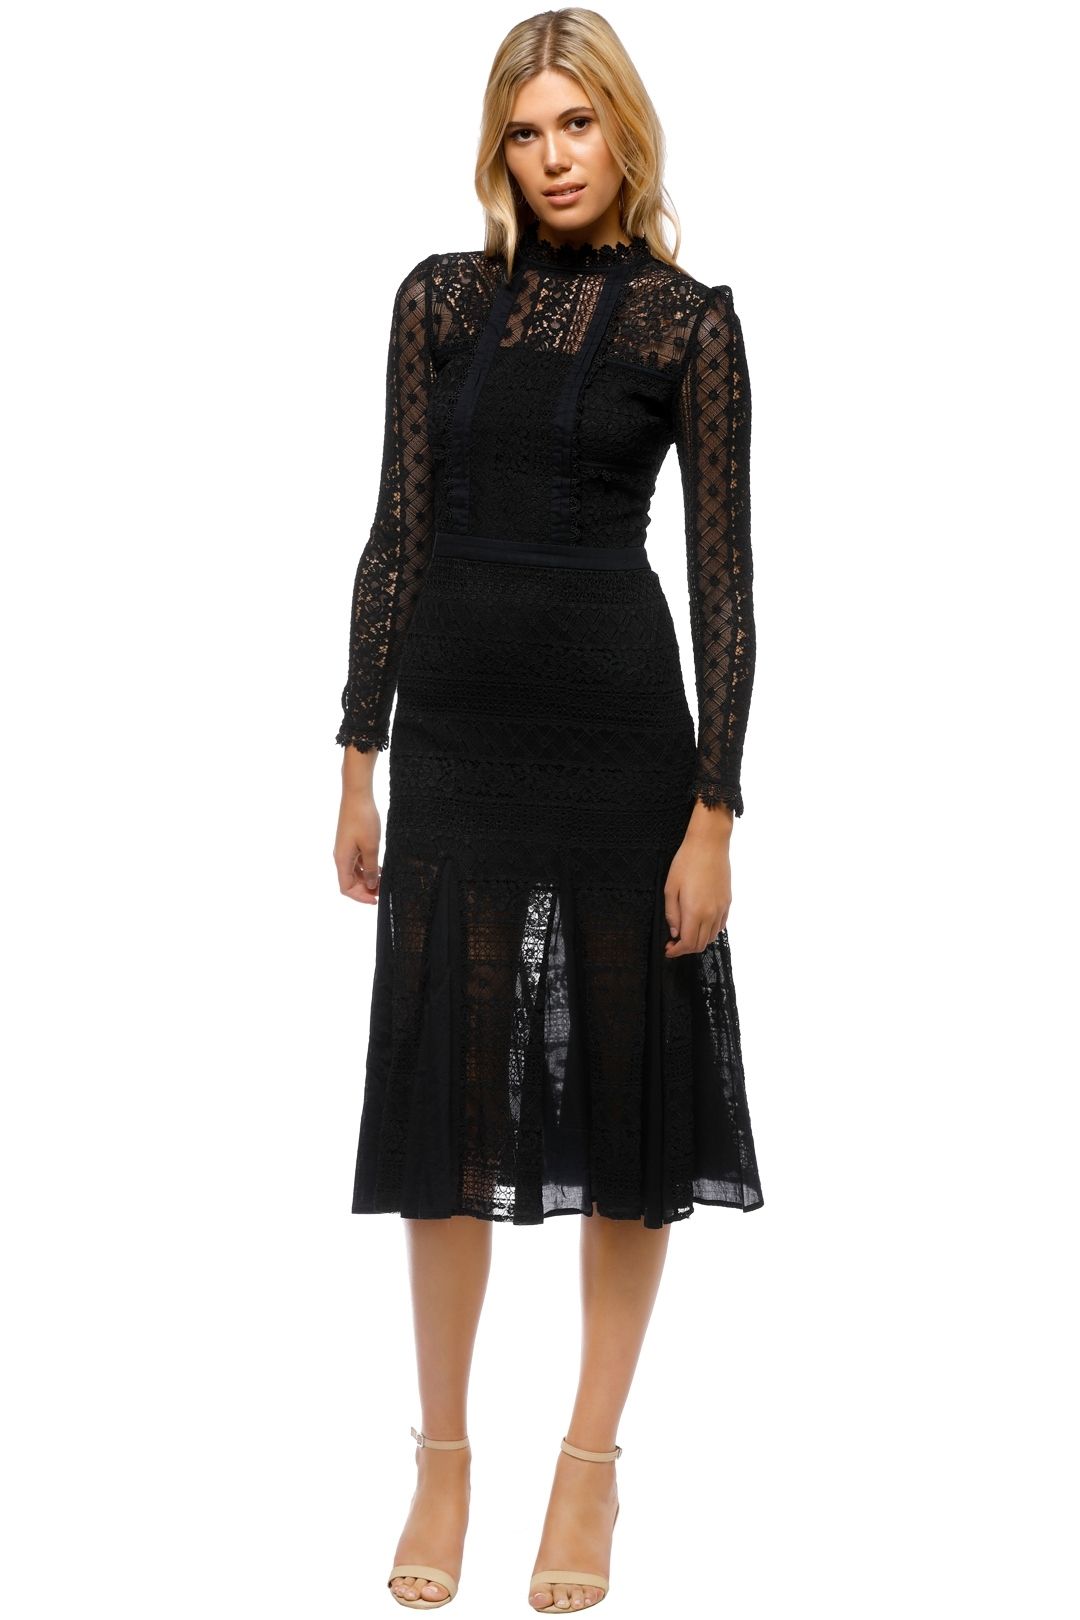 Desdemona Lace Midi Dress by Temperley London for Hire